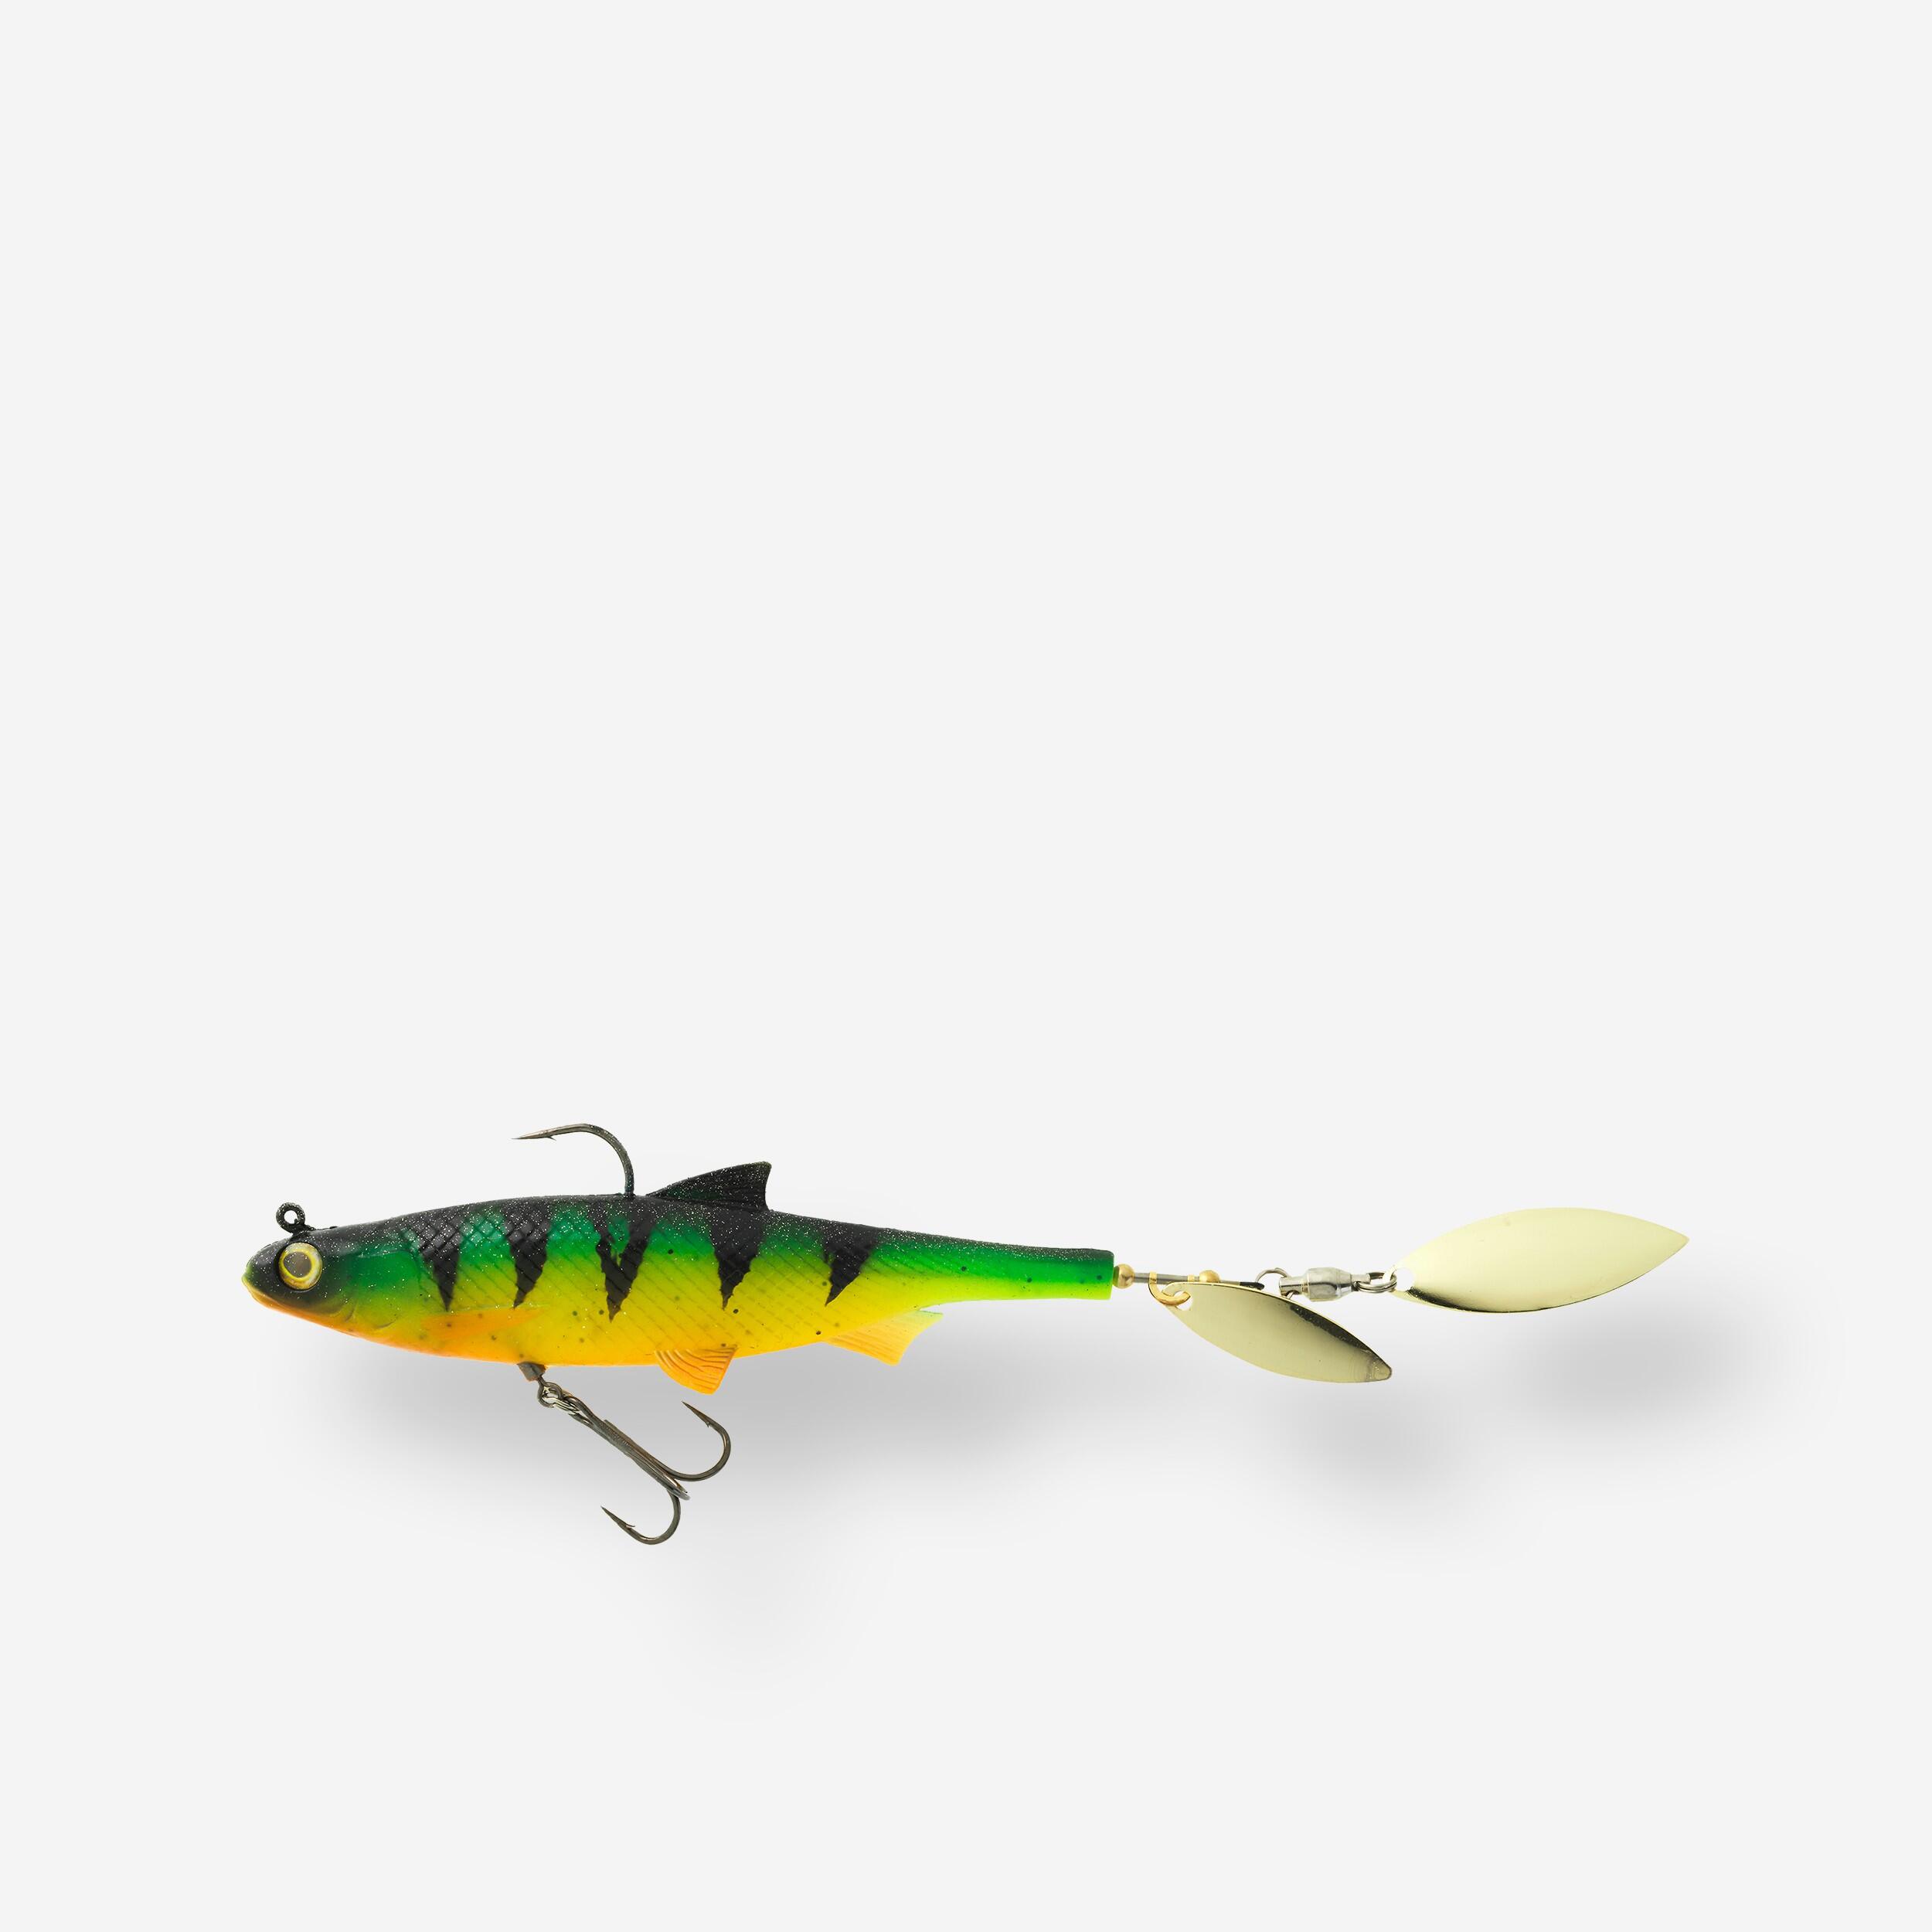 LURE FISHING ROACHSPIN 120 FIRETIGER BLADED SHAD SOFT LURE